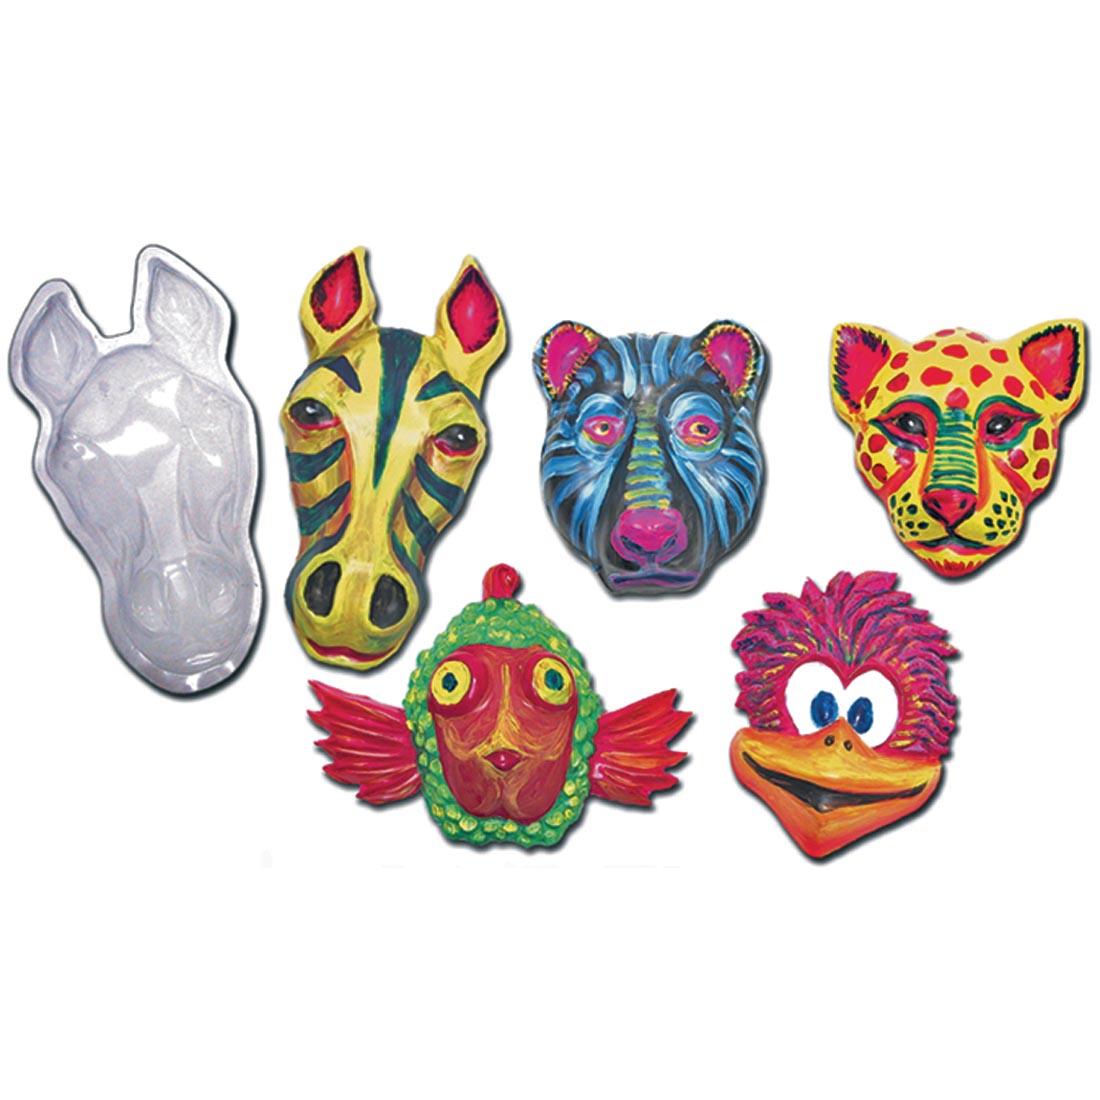 Blank horse head from the Roylco Animal Face Forms is shown with all five animals as completed examples